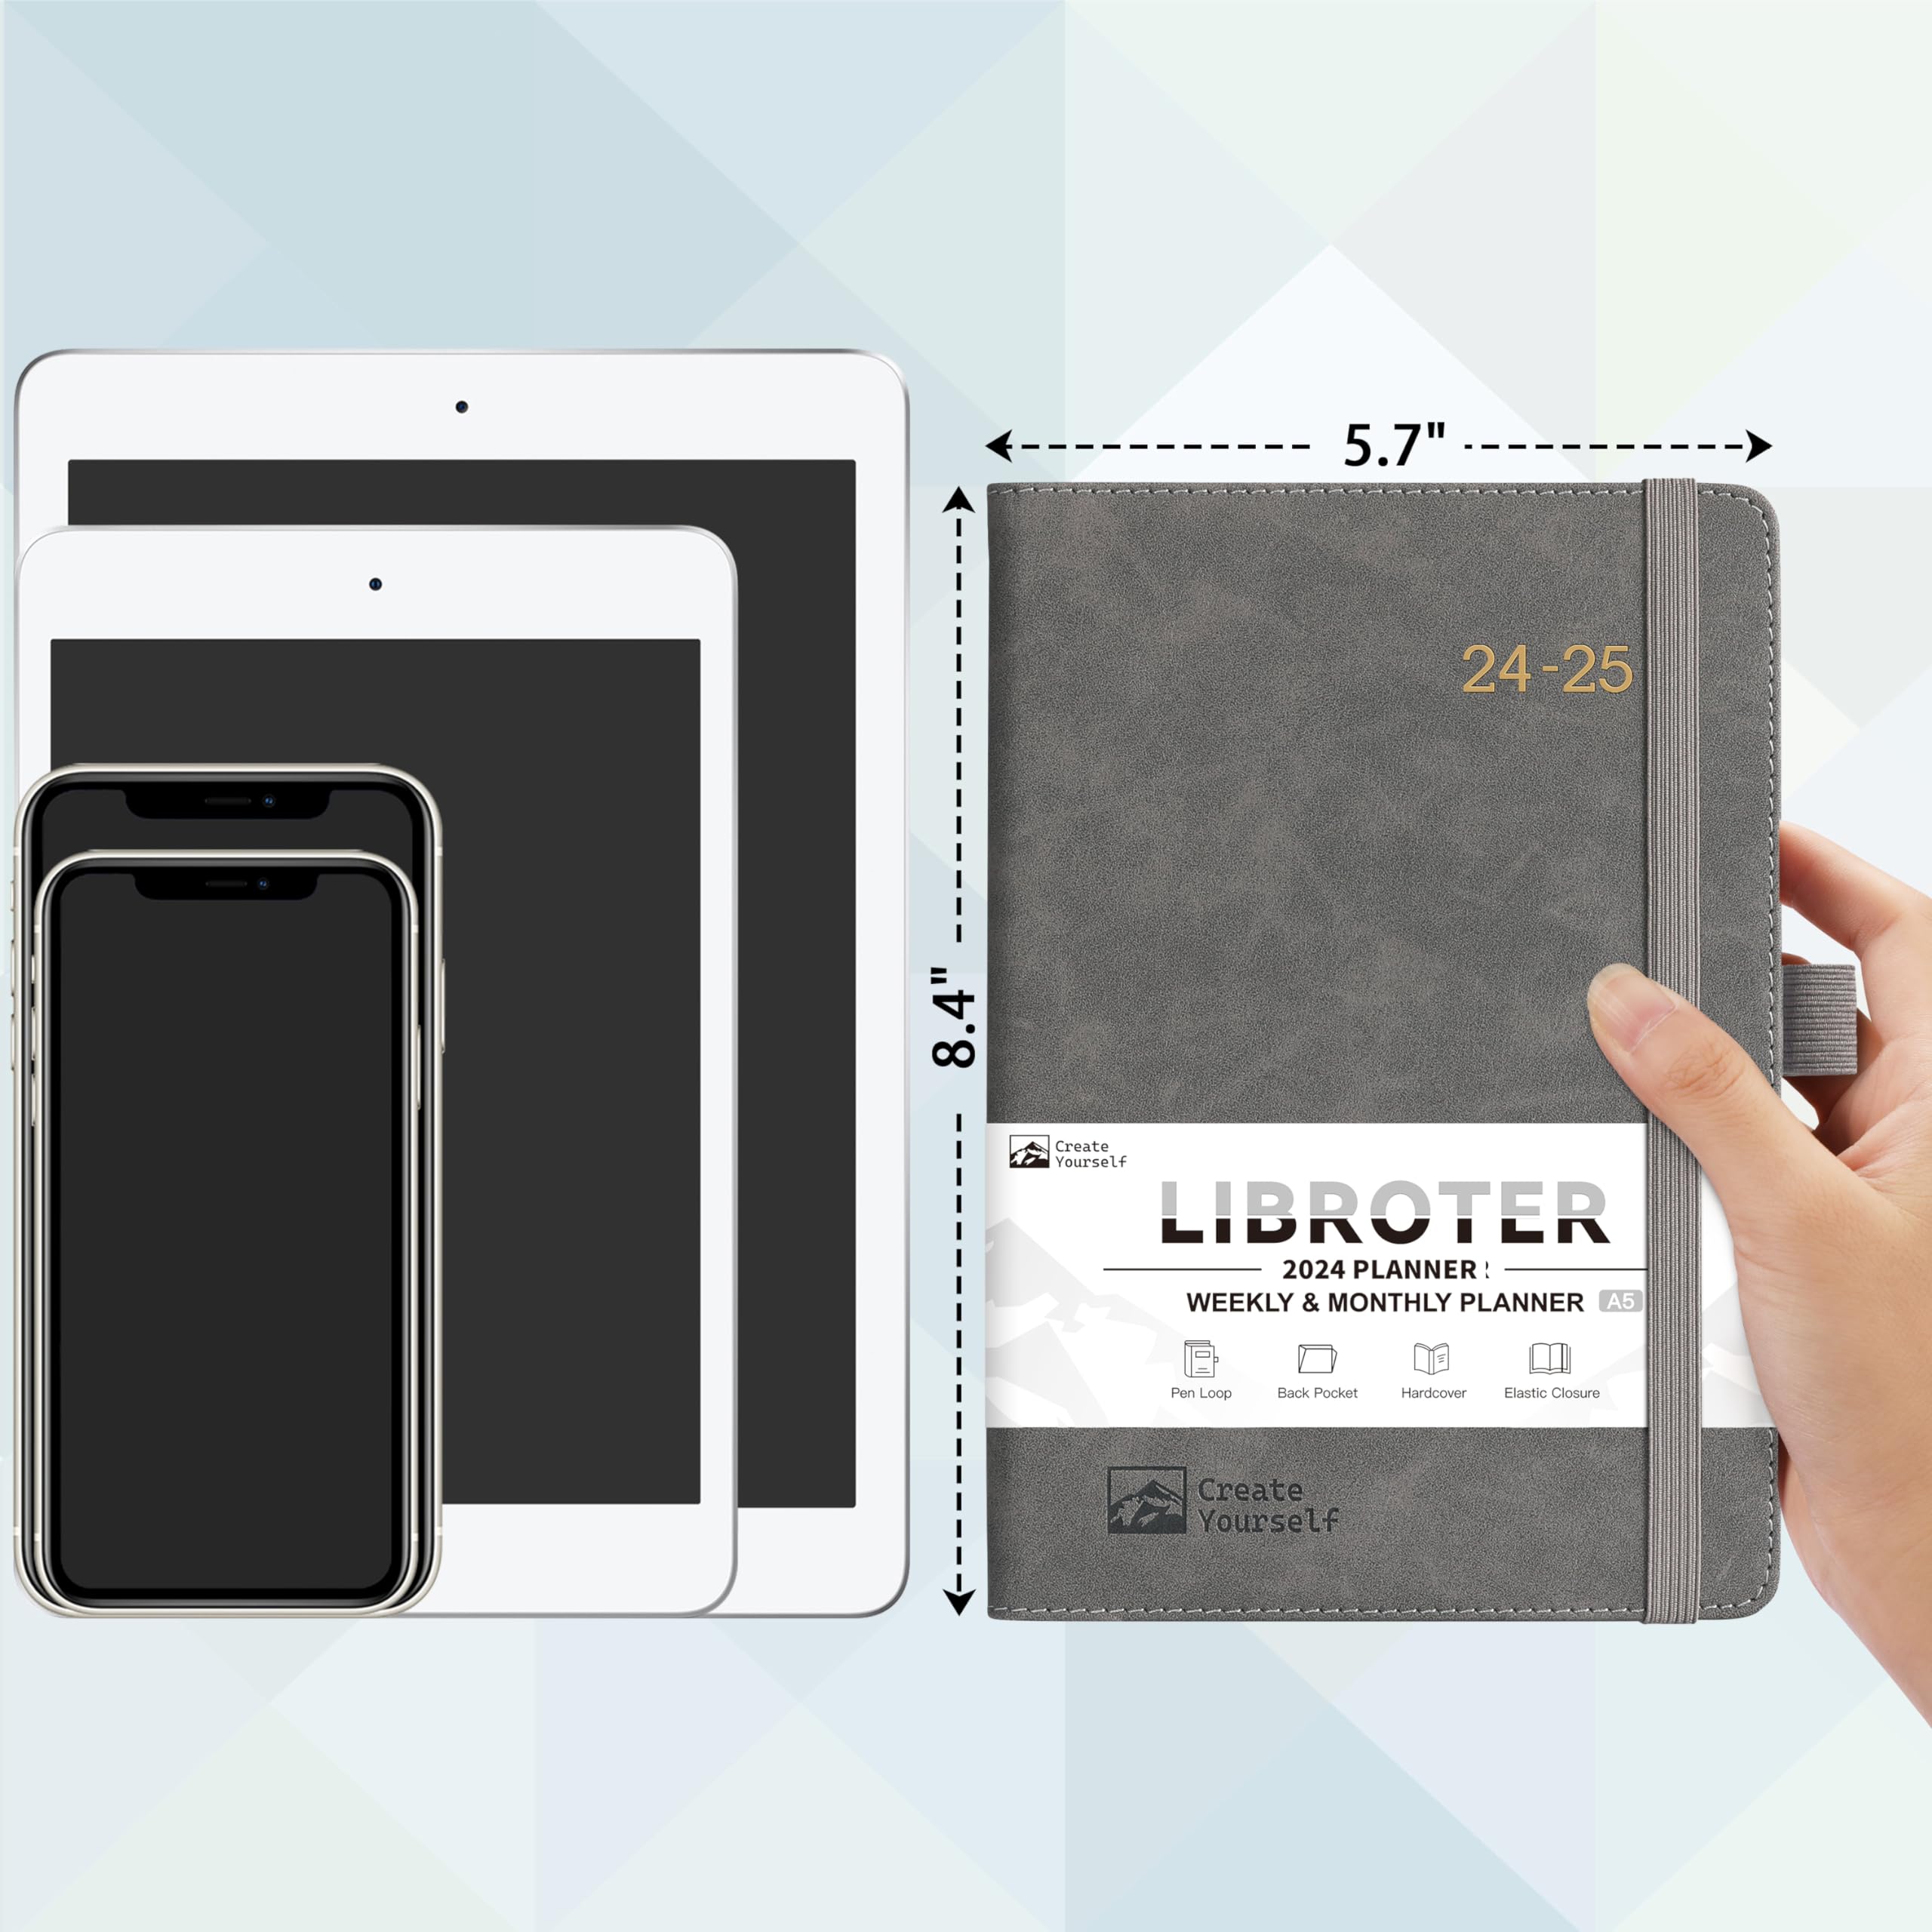 2024-2025 Planner - Planner 2024-2025, 2024-2025 Weekly Monthly Planner, July 2024 - June 2025, 5.7'' x 8.4'', Thick Paper, Leather Cover, Pen Holder, Back Pocket, Perfect Daily Organizer - Grey